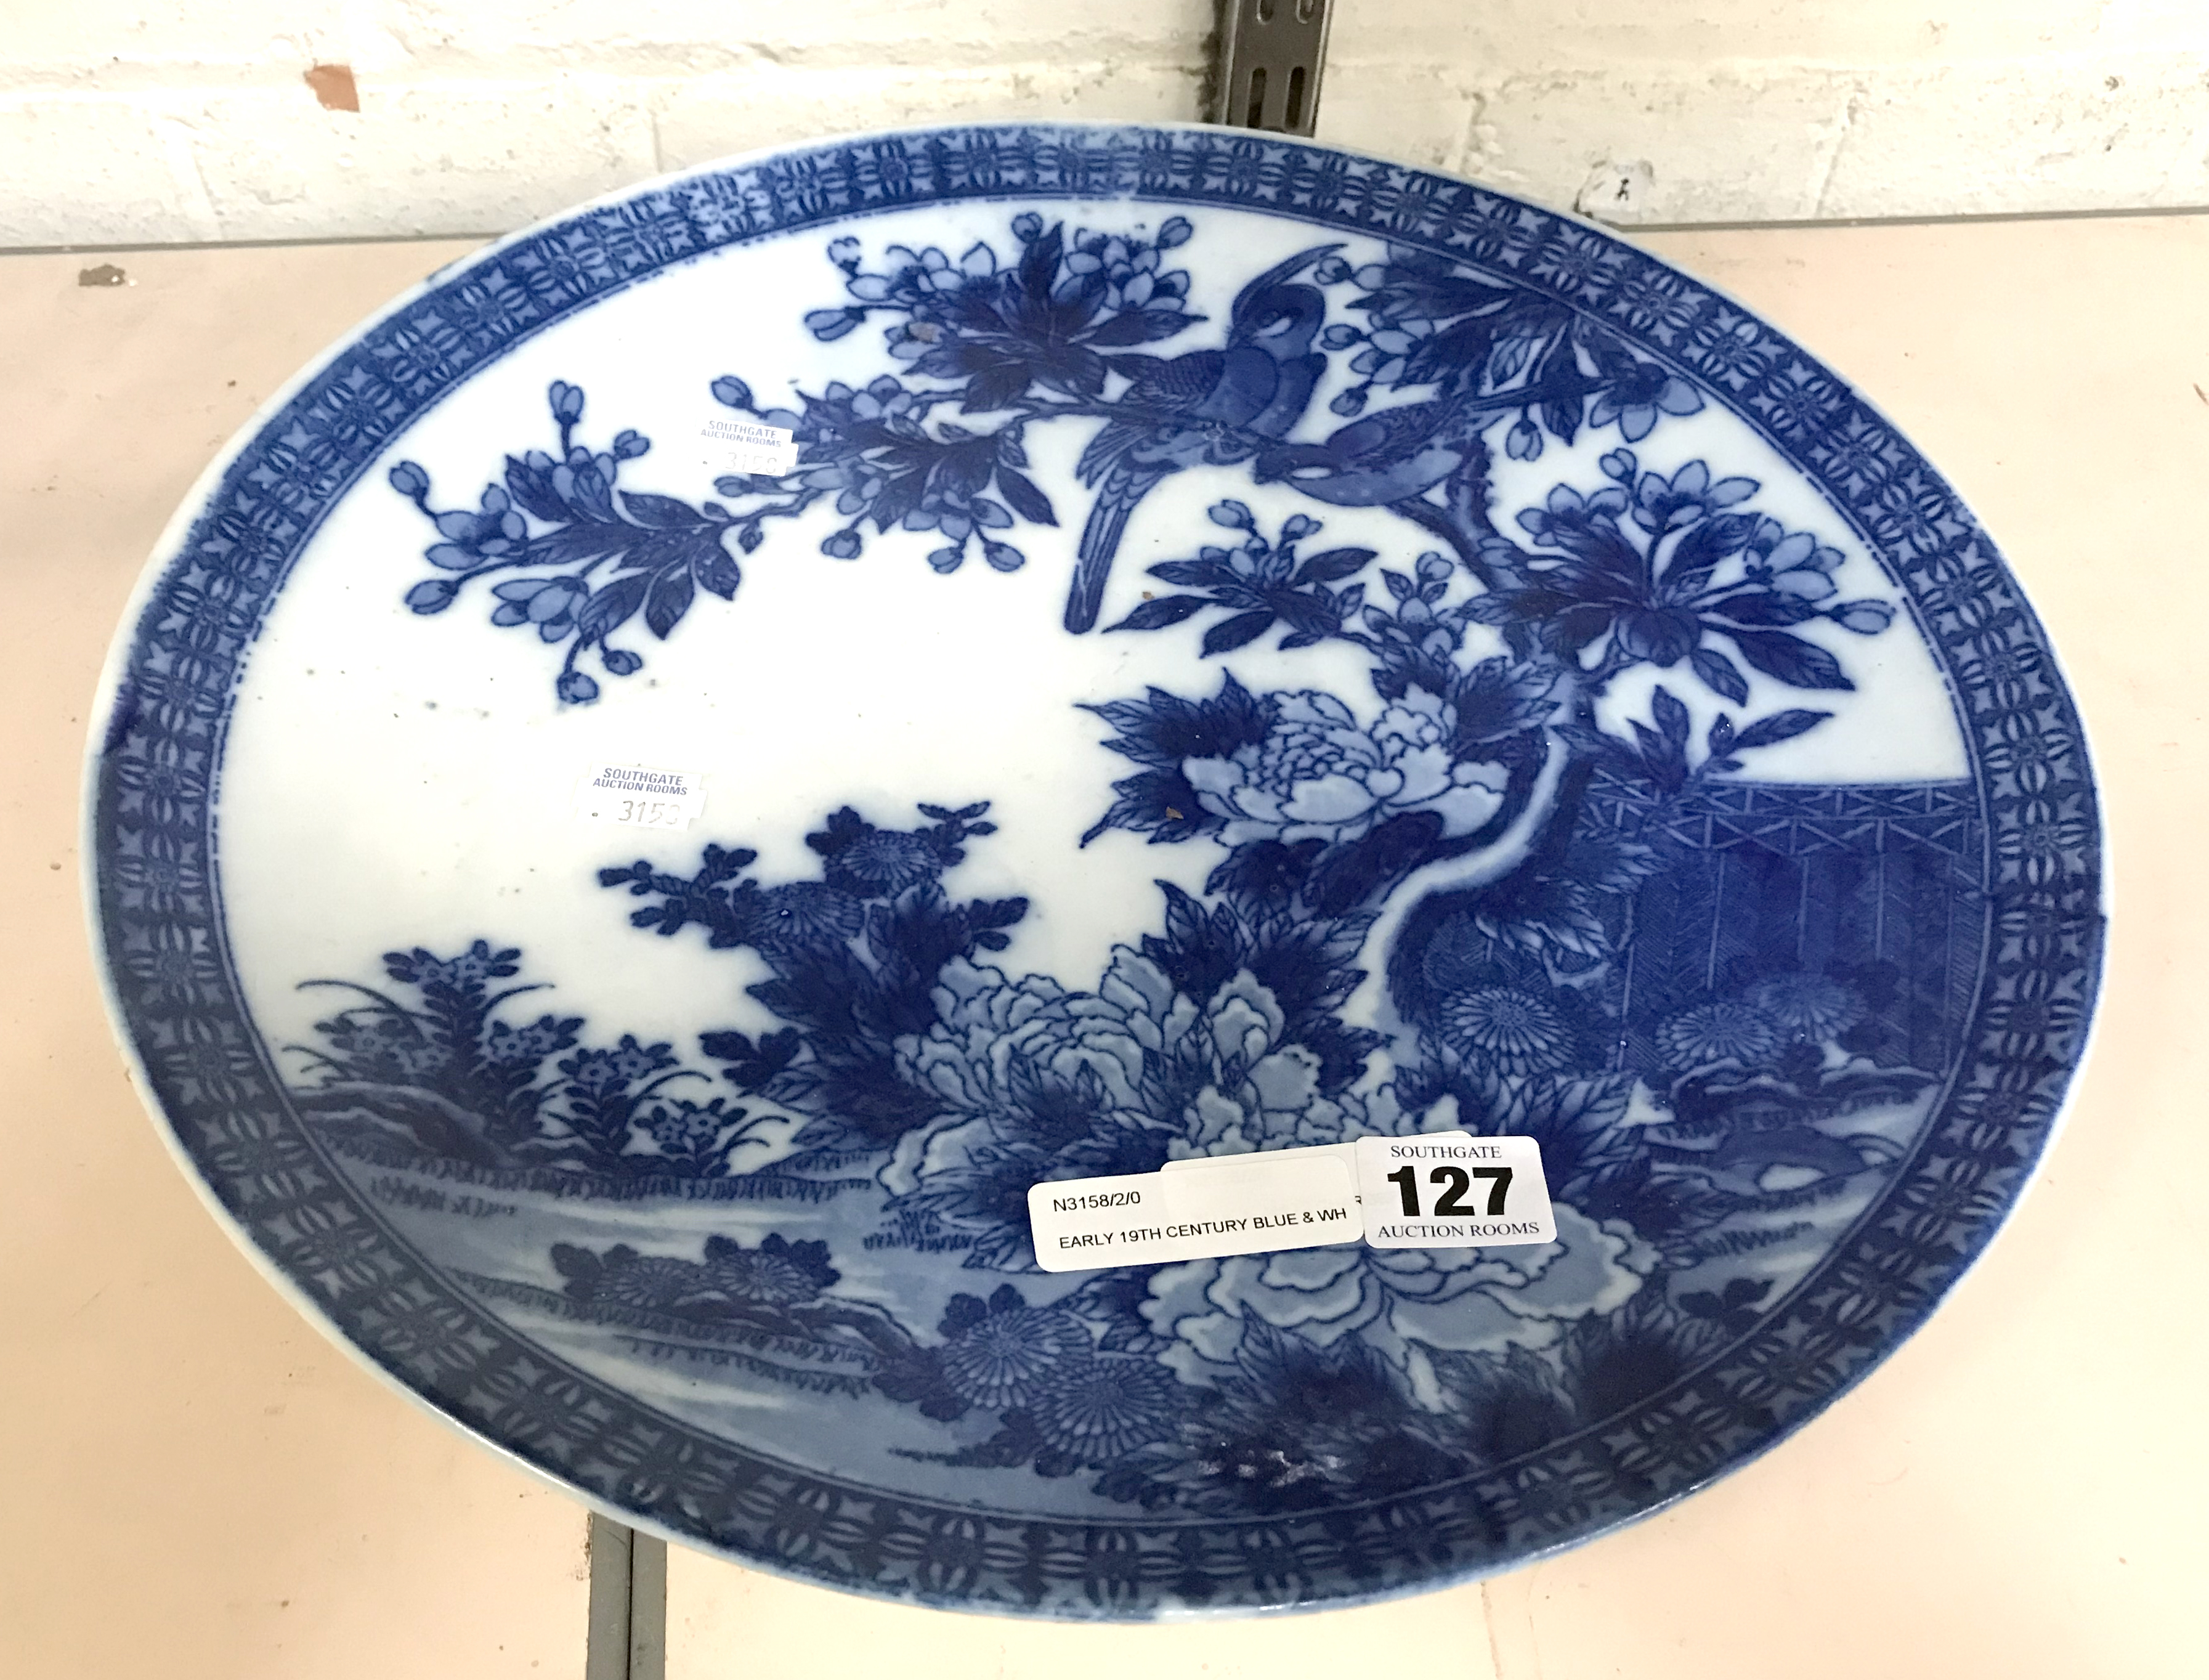 EARLY 19TH CENTURY BLUE & WHITE CHARGER - 37 CMS